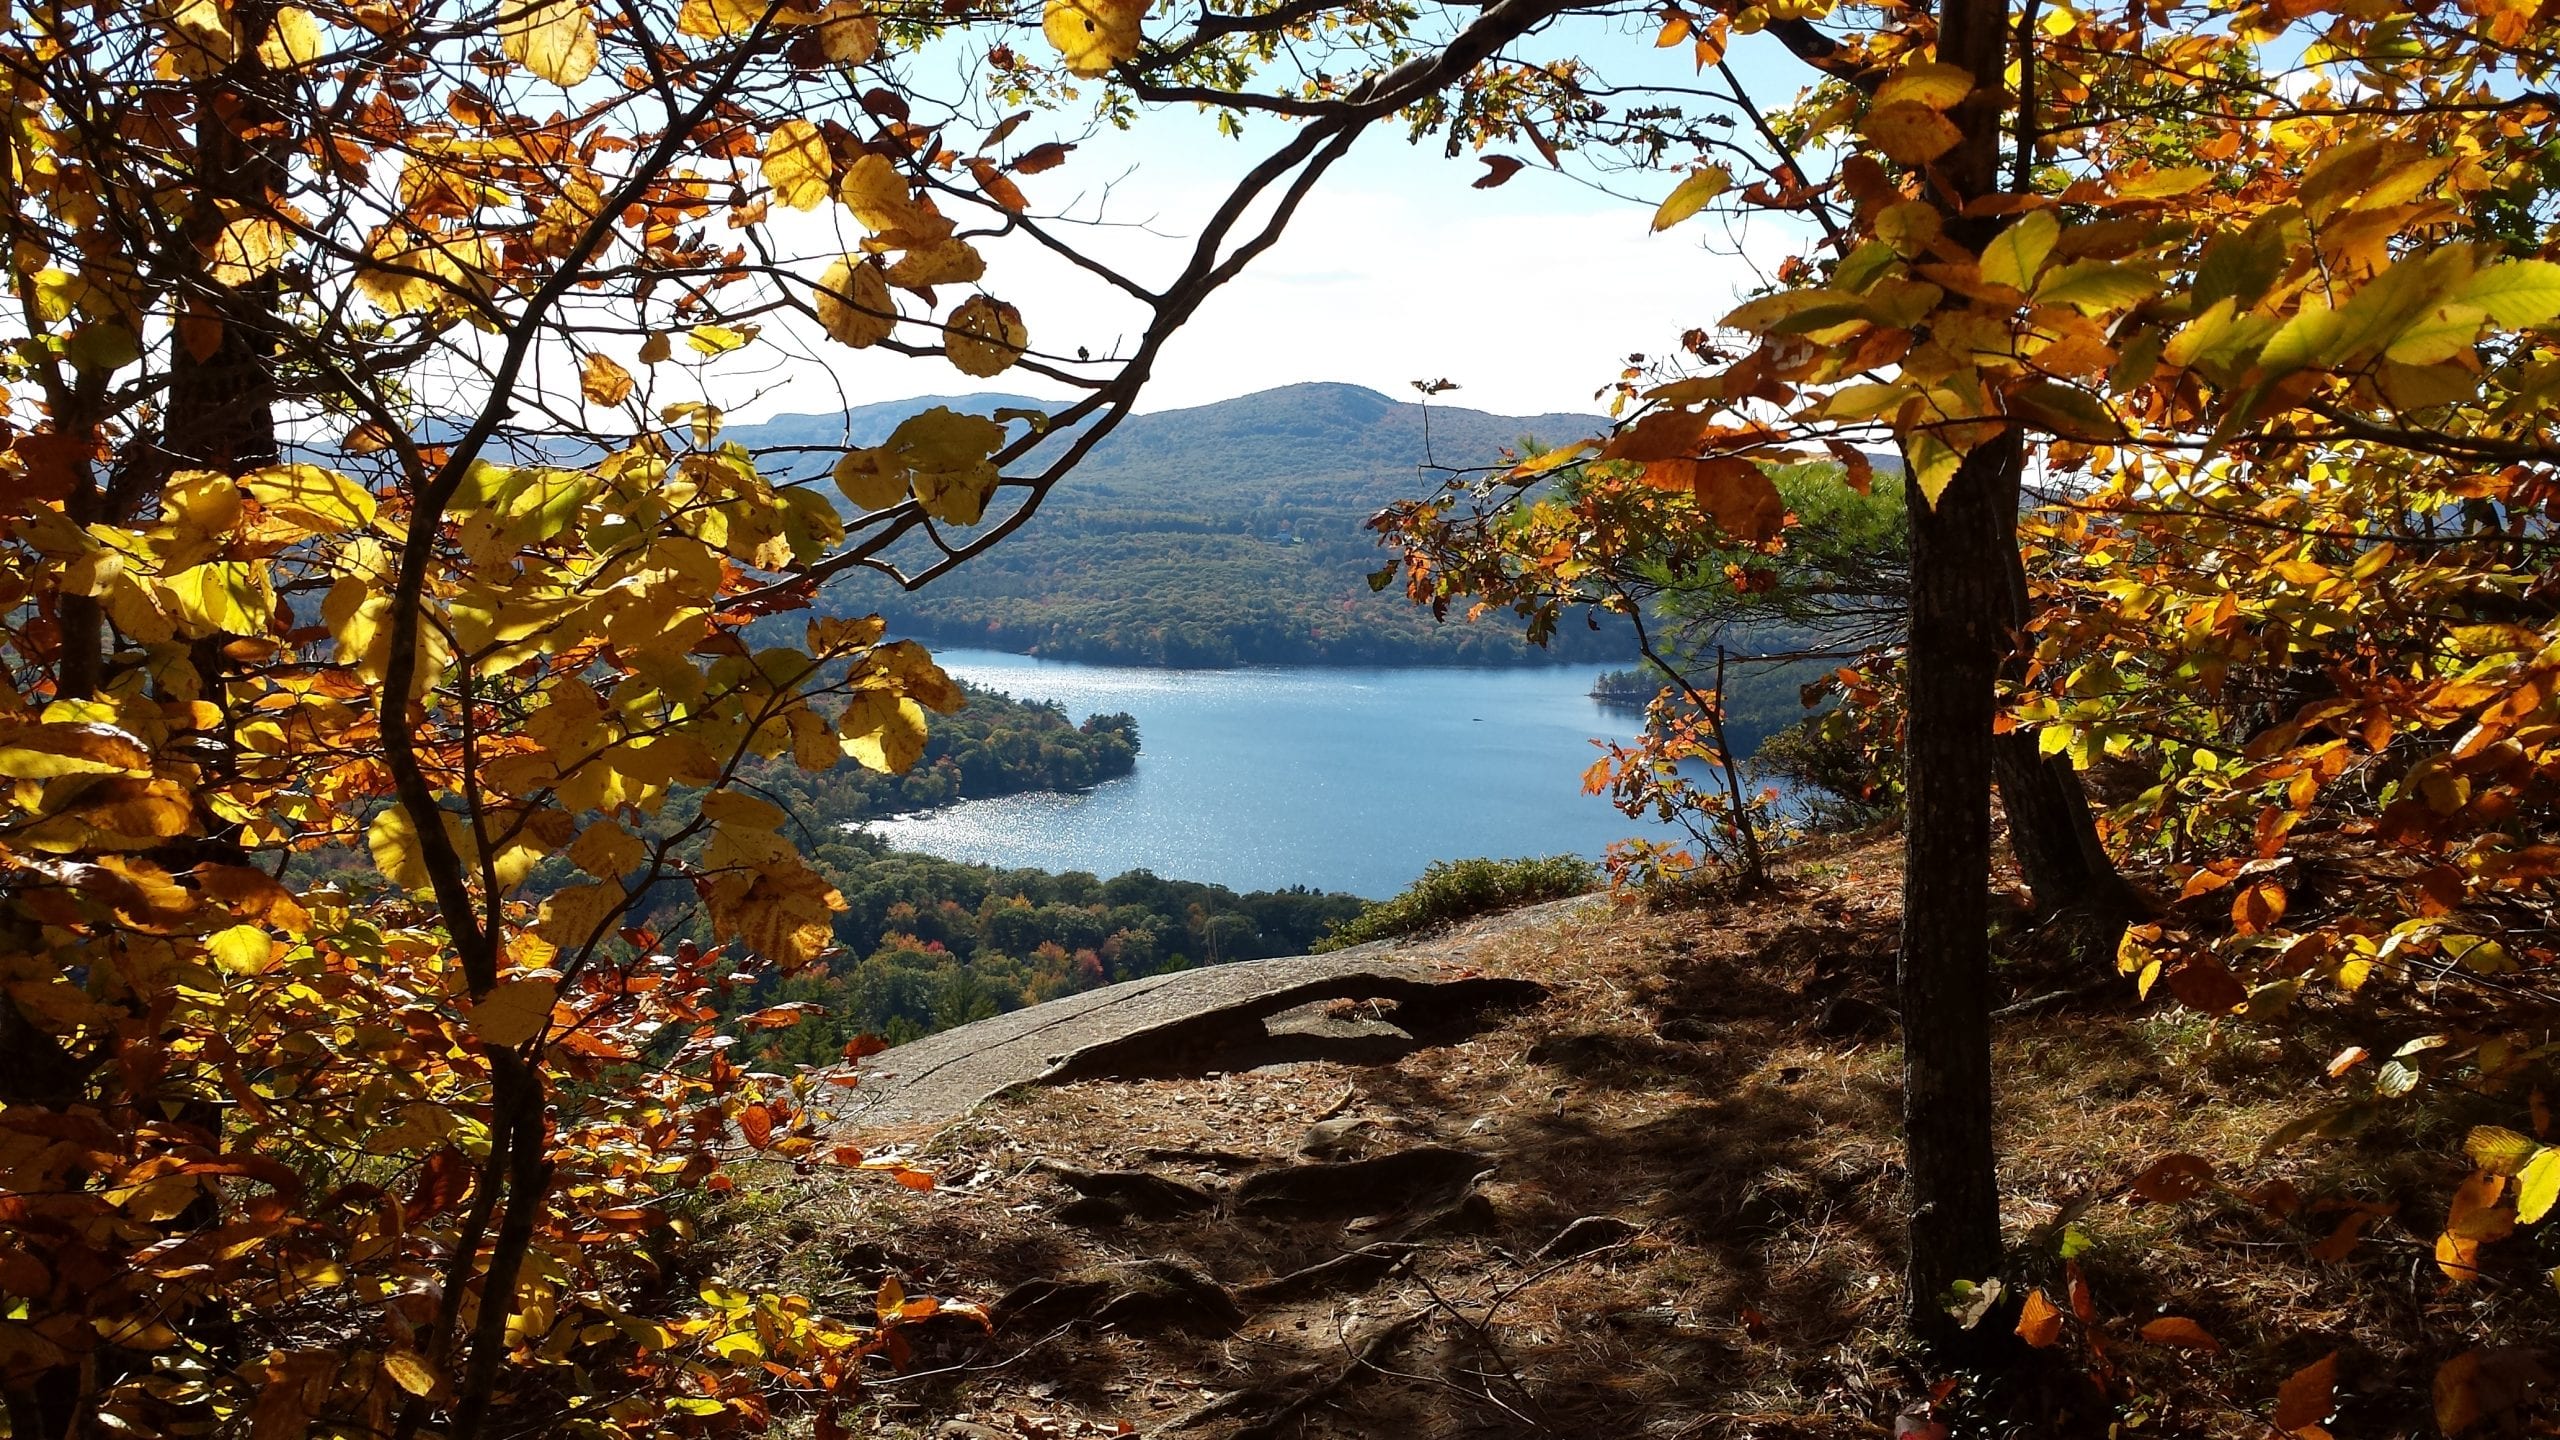 Take some of the most beautiful photos during the foliage season in Maine.